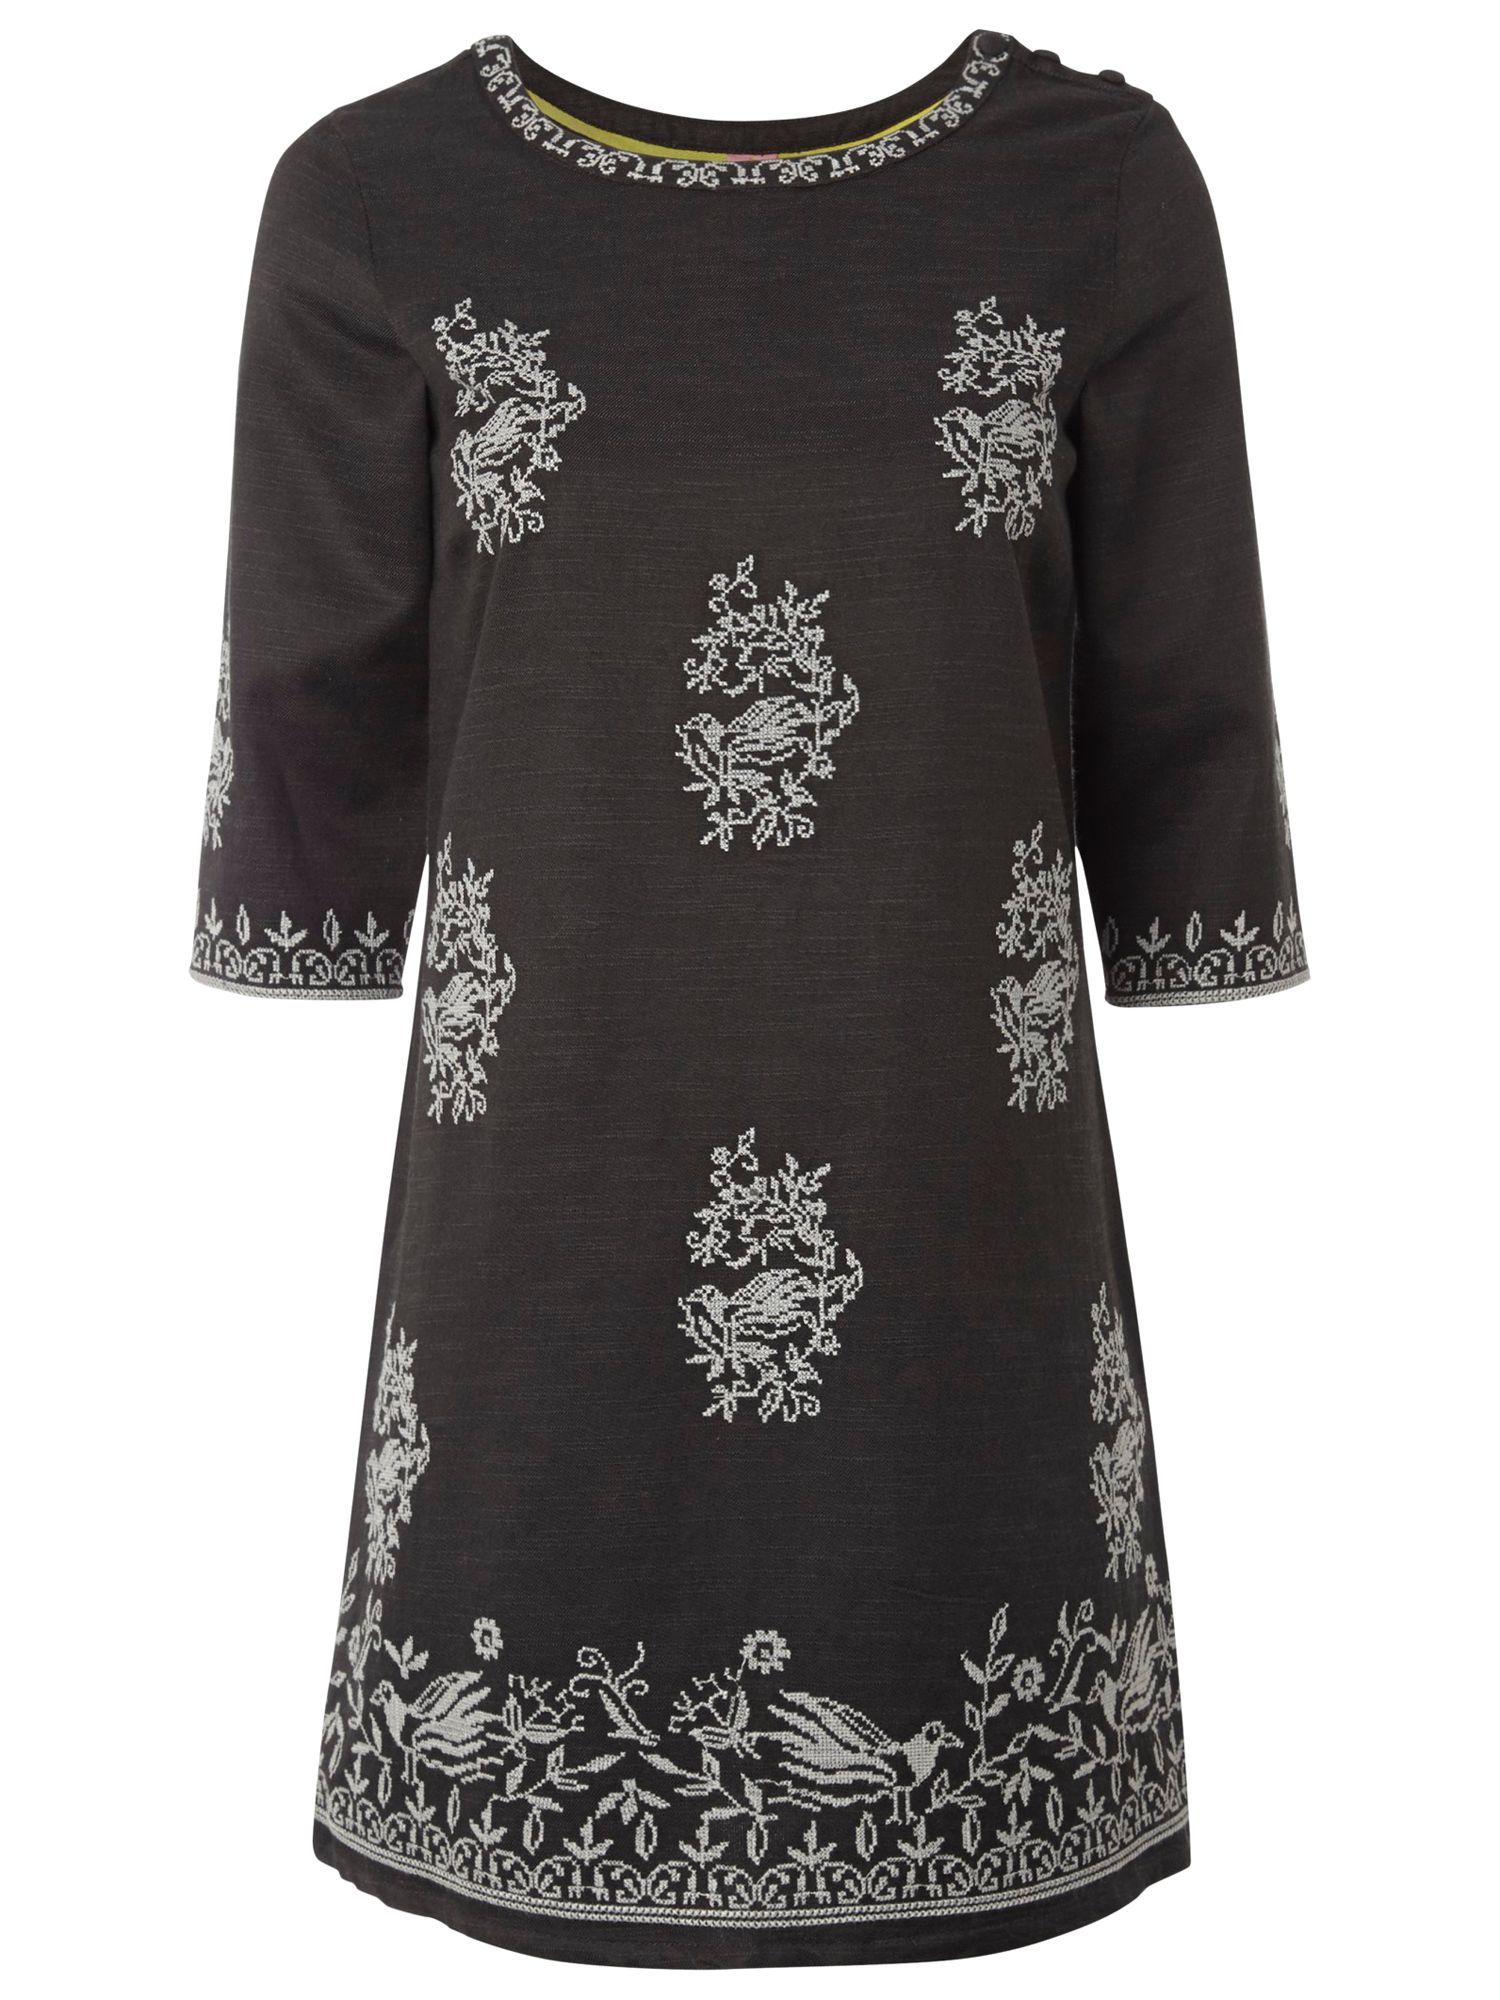 women's embroidered tunic dress